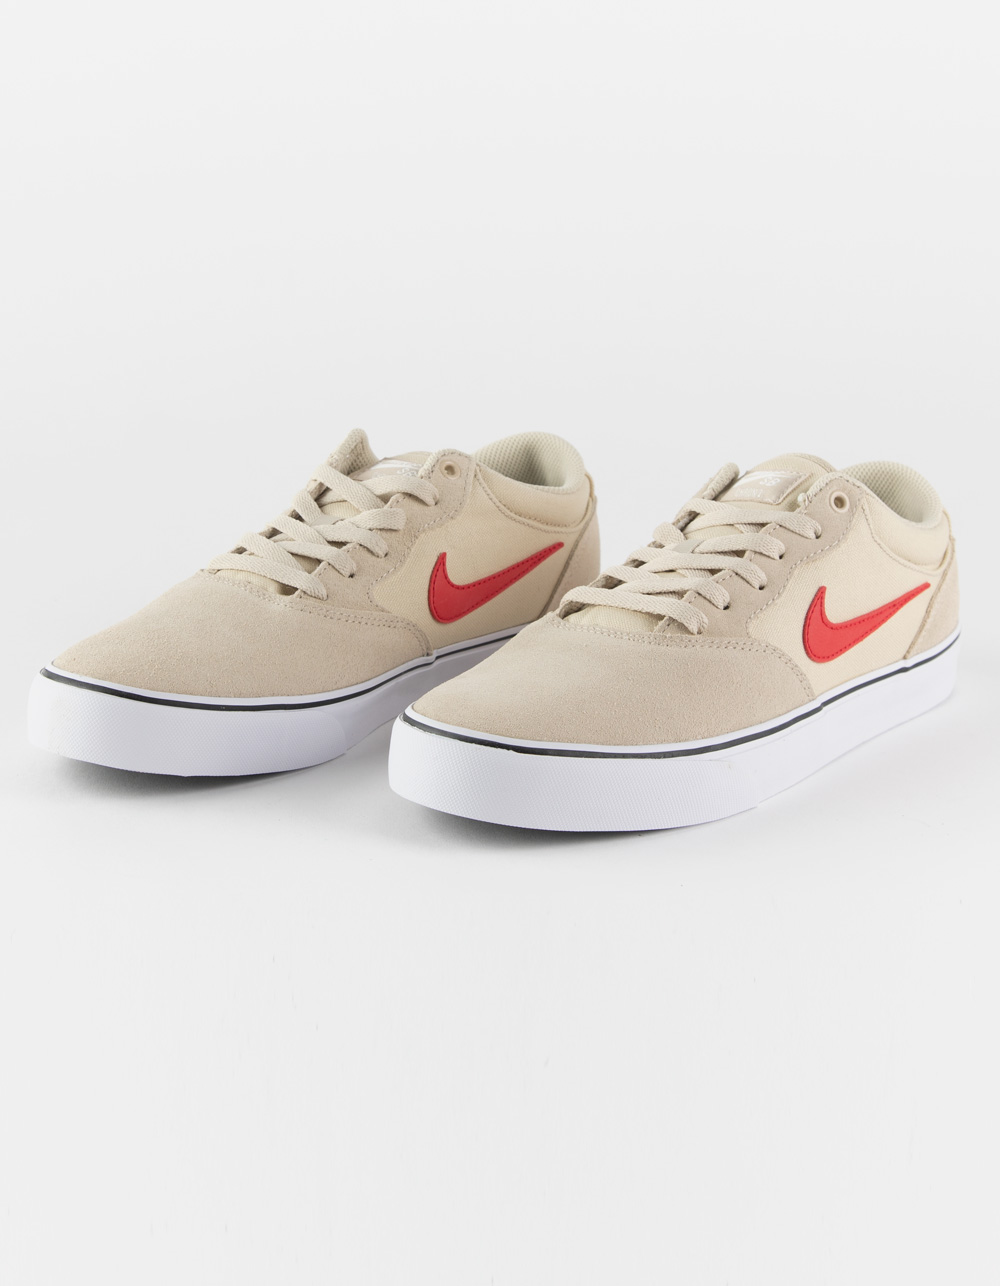 NIKE SB Chron 2 Shoes - RED COMBO | Tillys